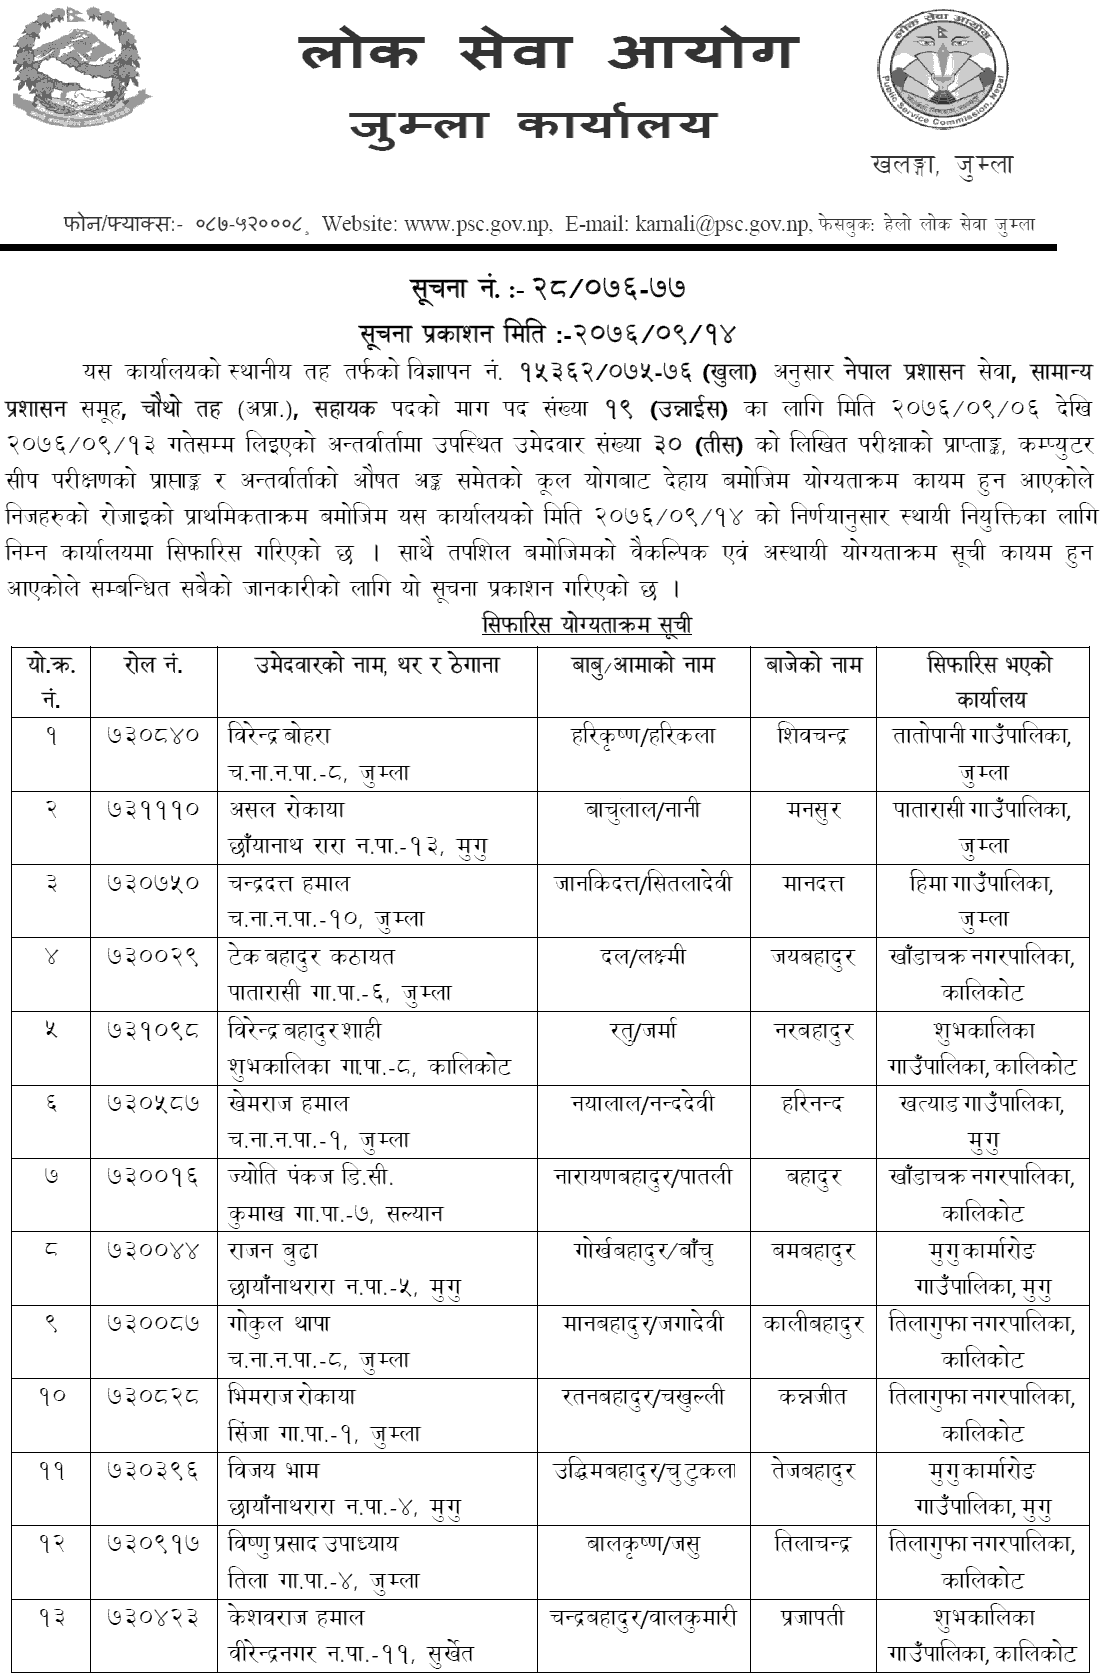 Lok Sewa Aayog Jumla Local Level 4th Assistant Final Result and Appointment